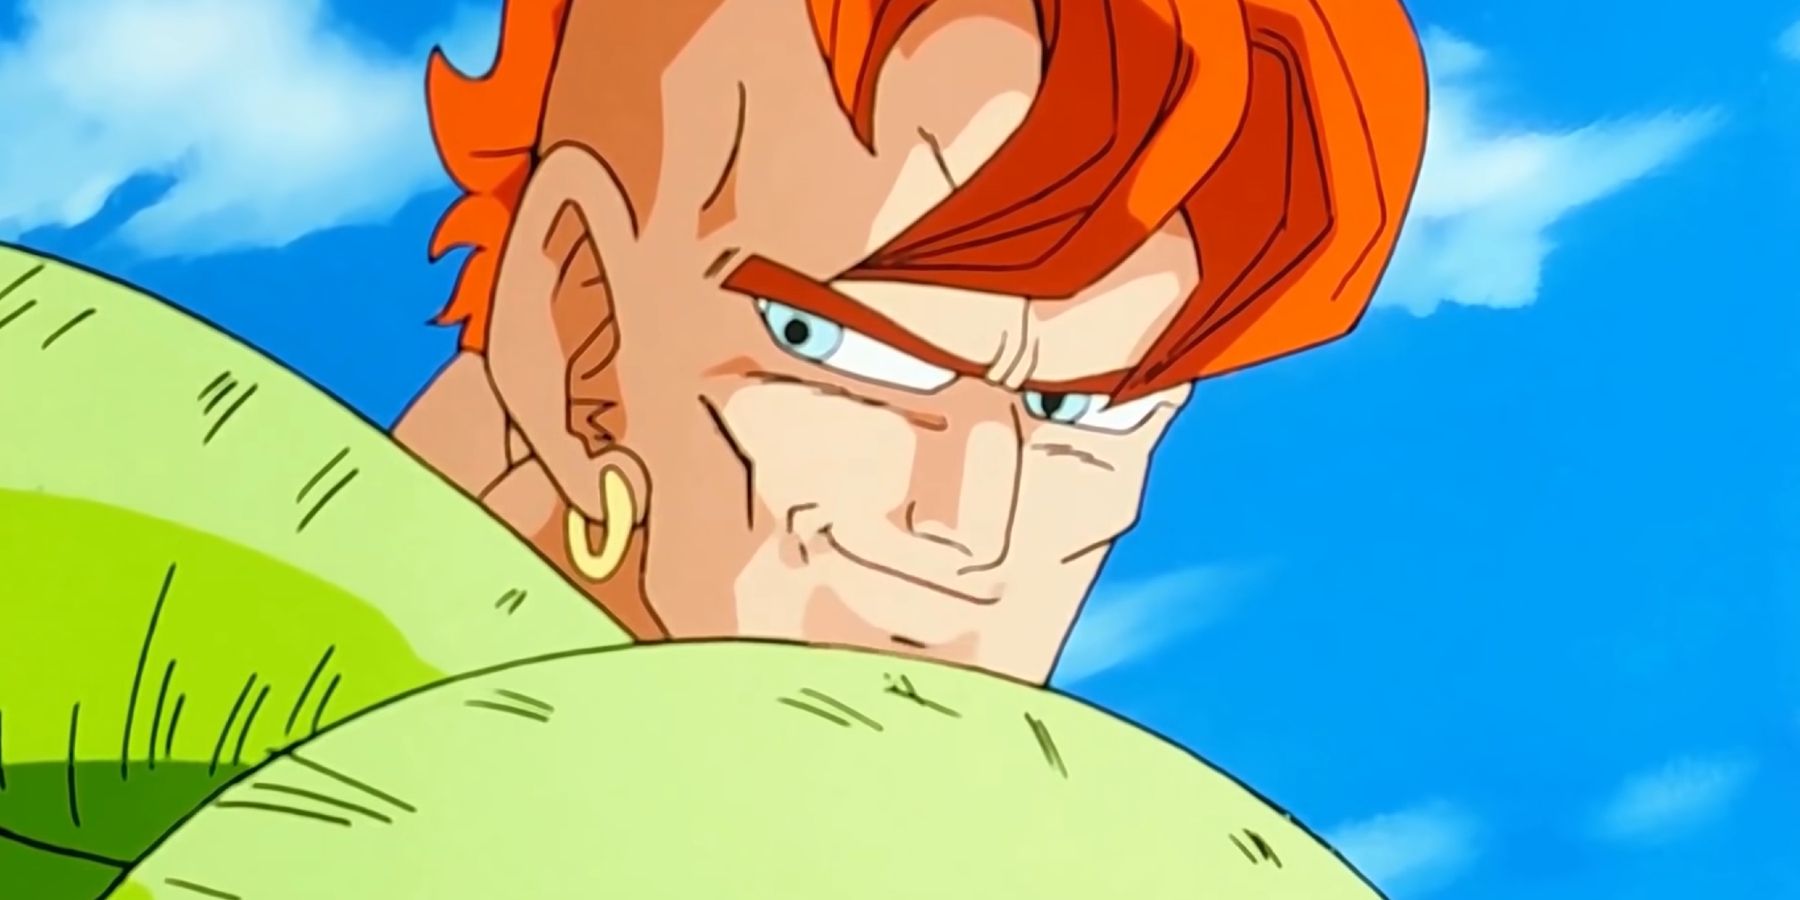 Android 16 smiles in Dragon Ball.